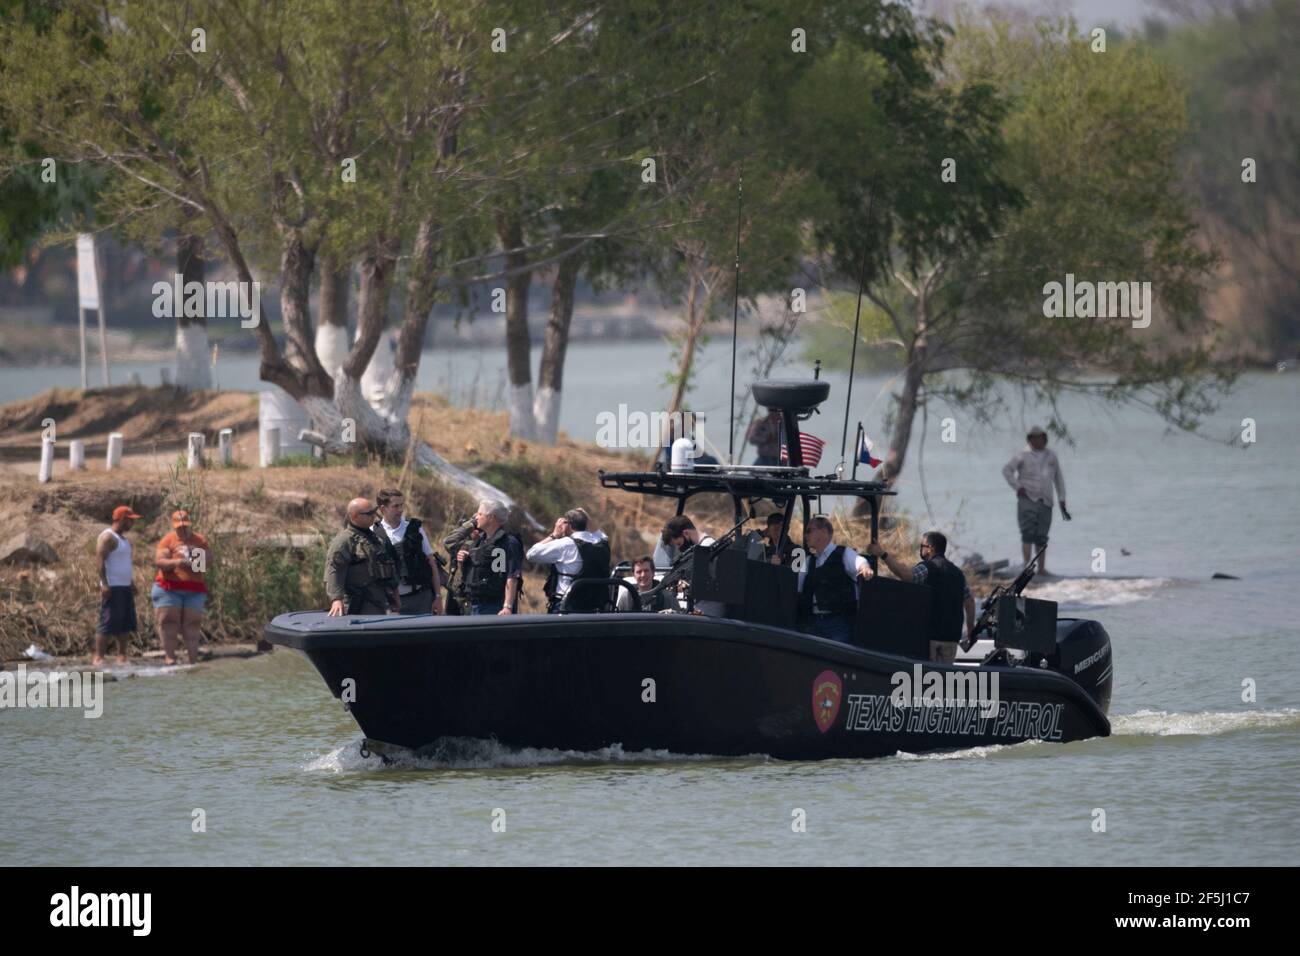 Granjeno, Texas USA, 26th Mar, 2021. With Mexico in the background, a delegation of Republican senators ride on the Rio Grande River south of Mission in a heavily armed Texas Dept. of Public Safety gunboat. During their whirlwind tour of south Texas, the 18 senators saw an overcrowded migrant processing center in Donna and a corpse floating in the river north of Anzalduas Park. Credit: Bob Daemmrich/Alamy Live News Stock Photo